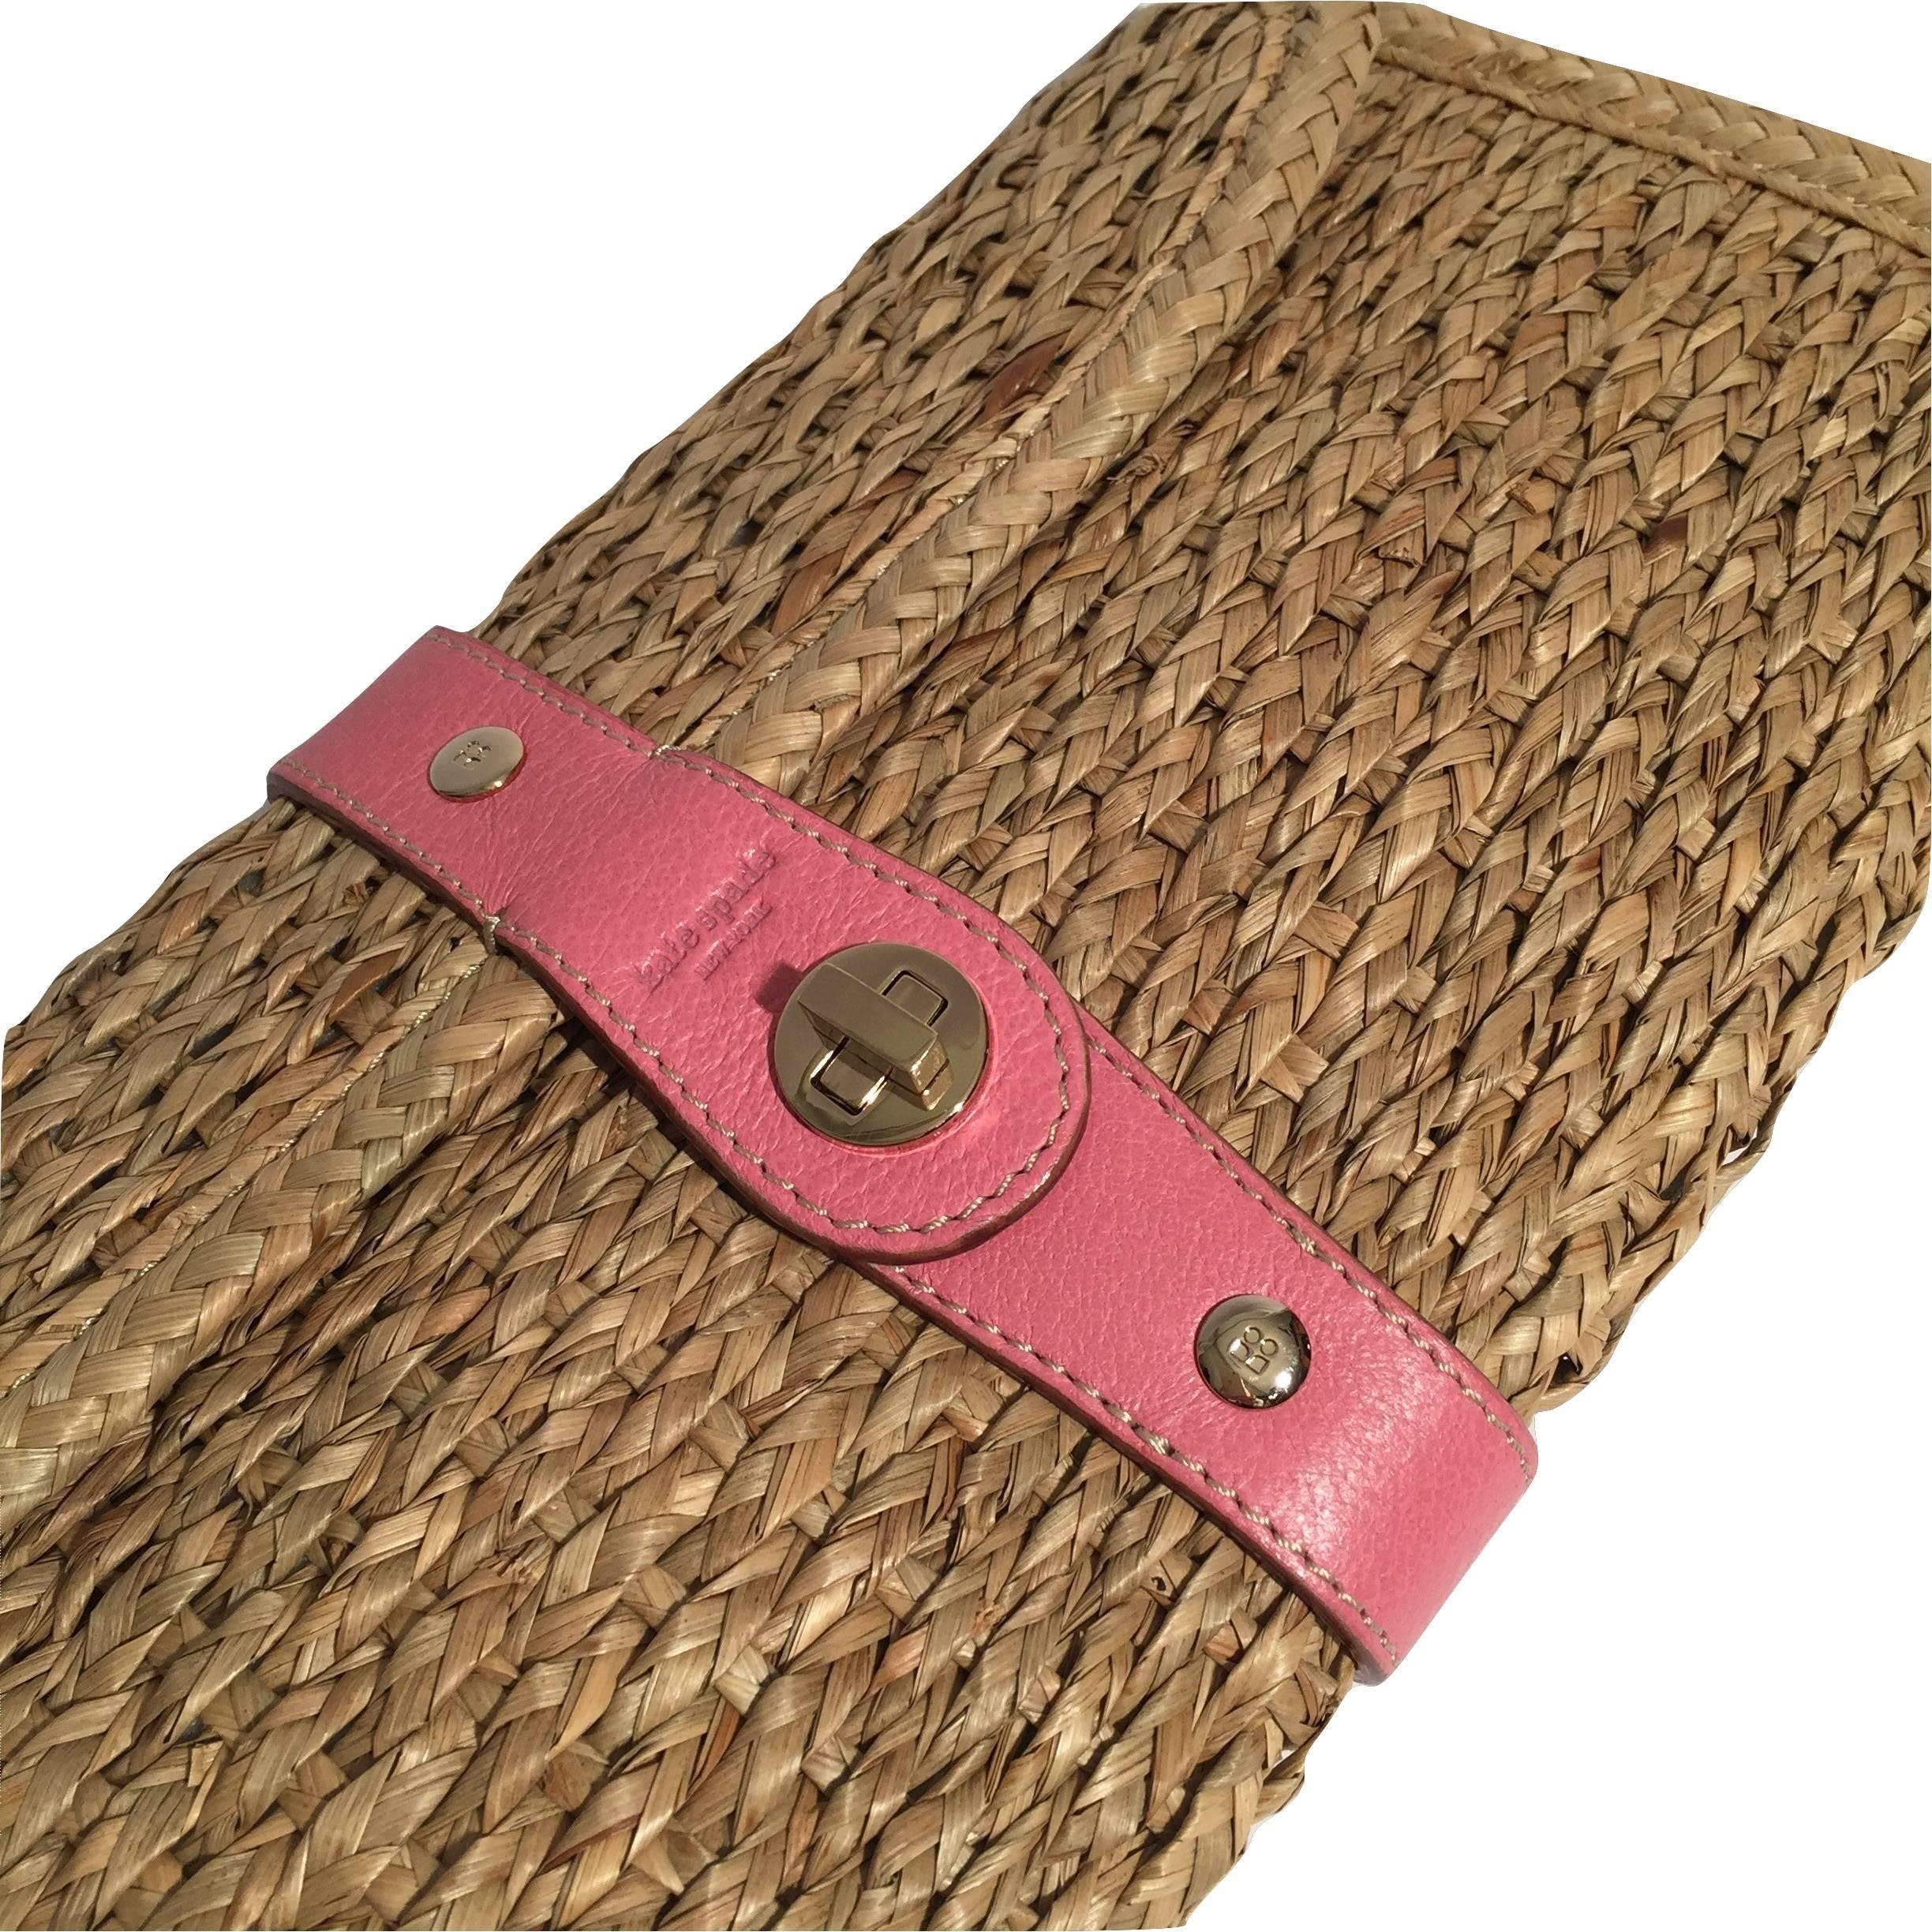 New Spring 2005 Collection Kate Spade Wicker Straw Rattan Clutch Bag  1